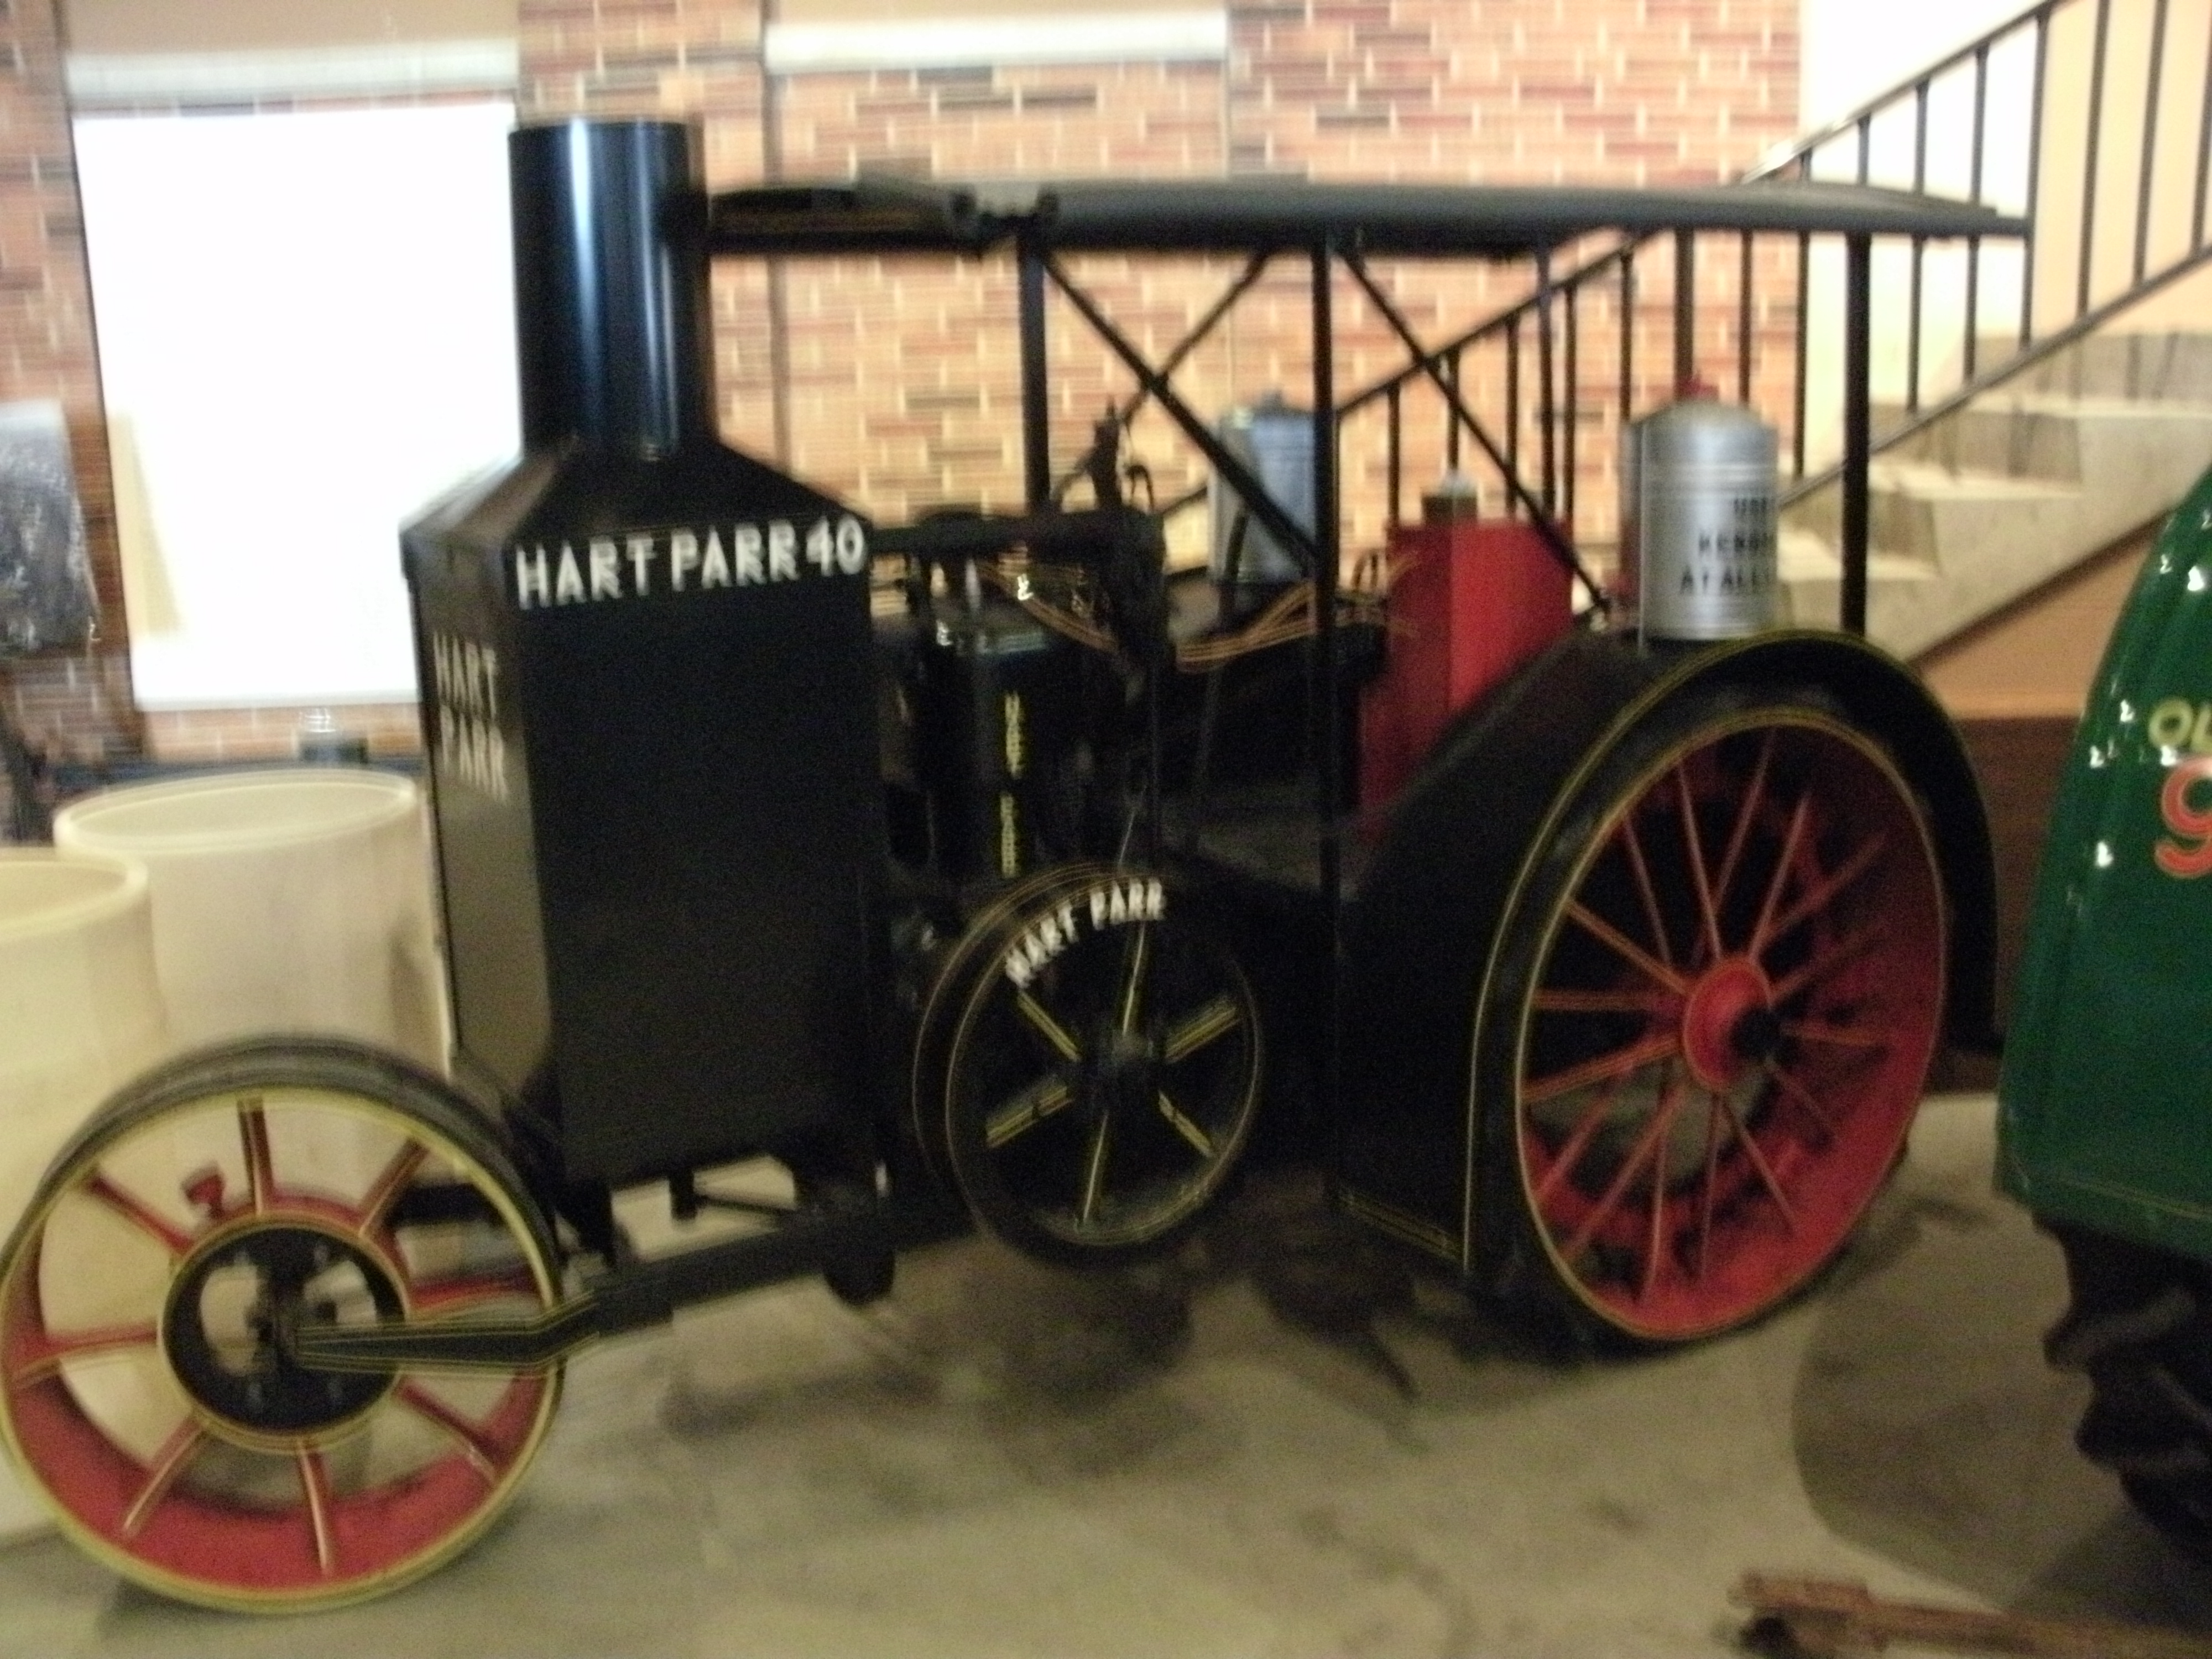 File:HART-PARR tractor 40 one third scale model pic 1.jpg - Wikimedia ...